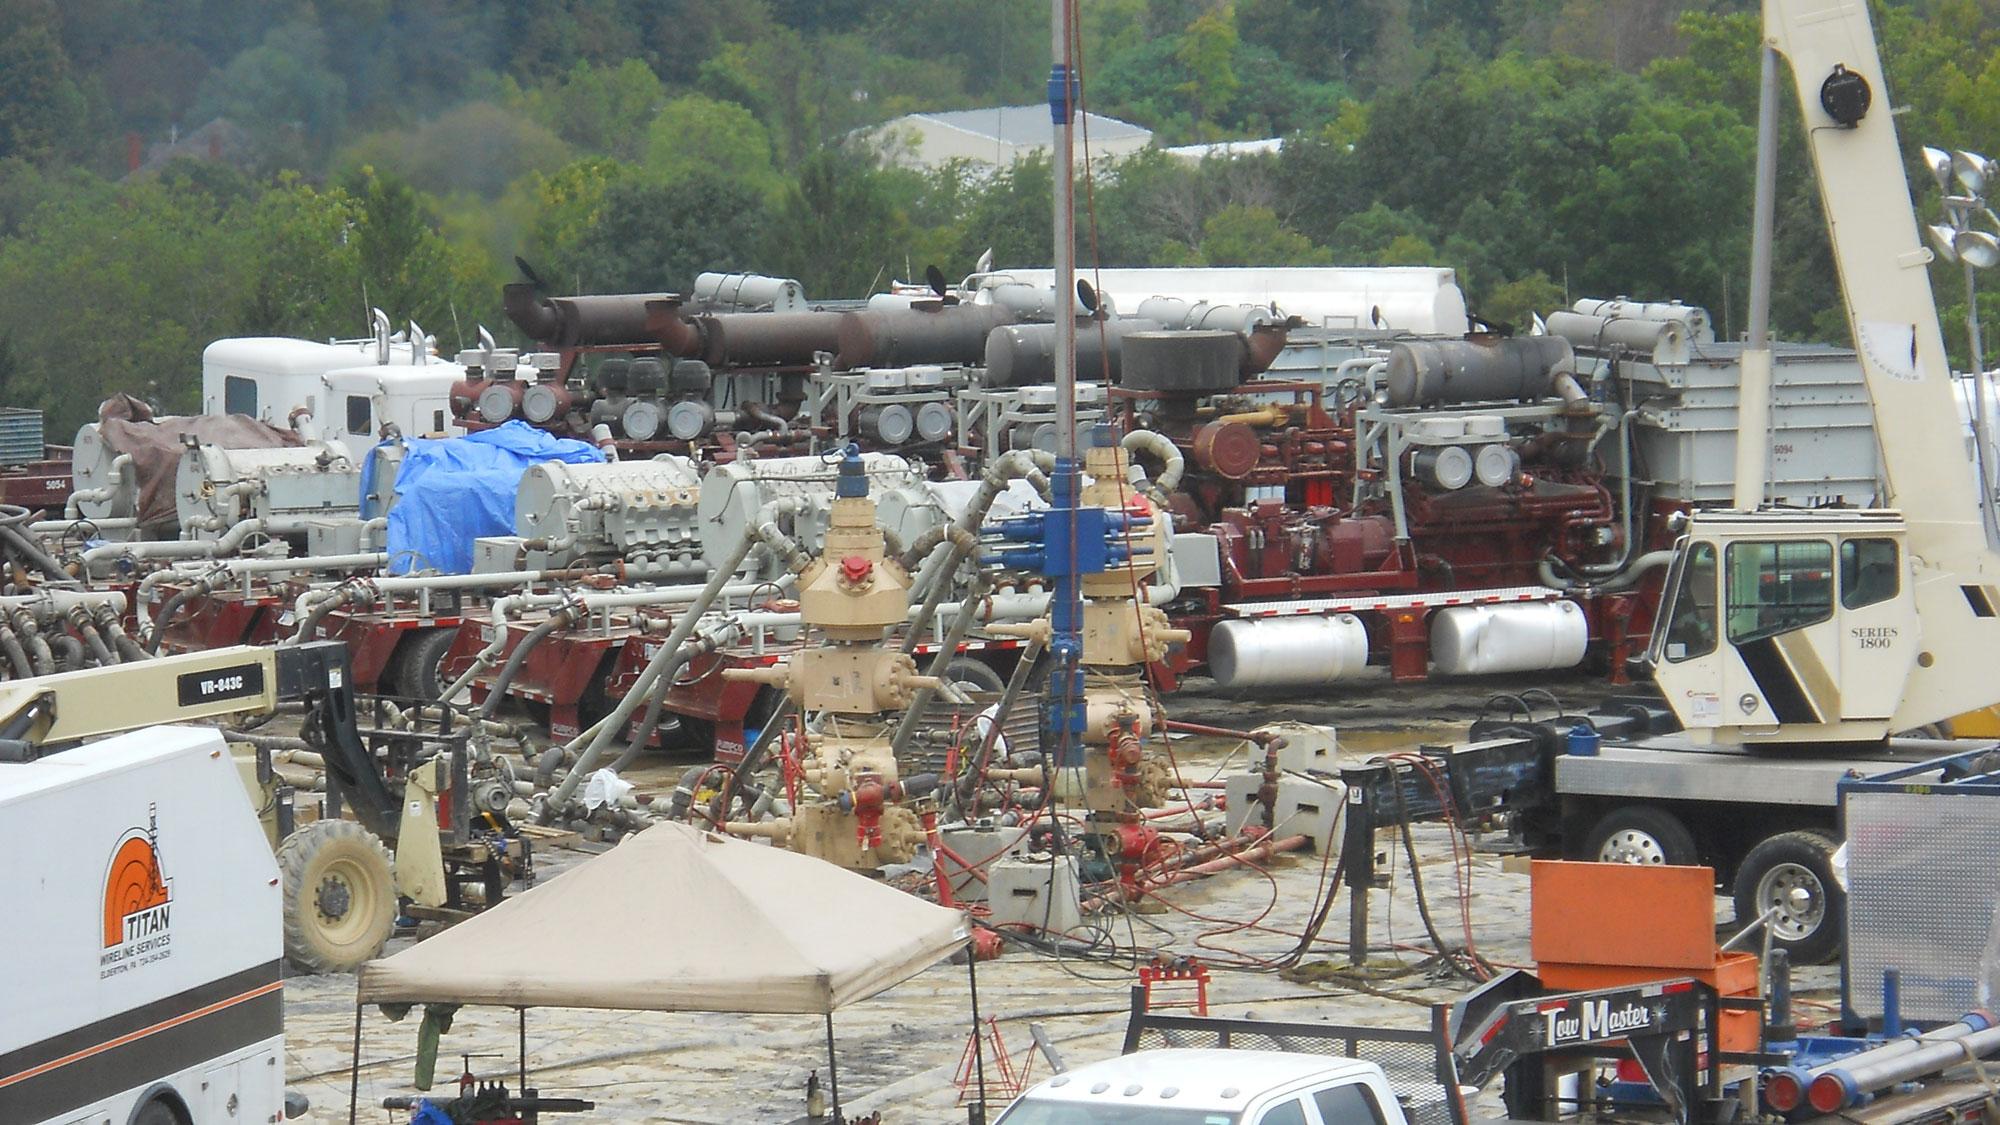 Photograph of a hydraulic fracturing operation underway in the Marcellus Shale of Pennsylvania.